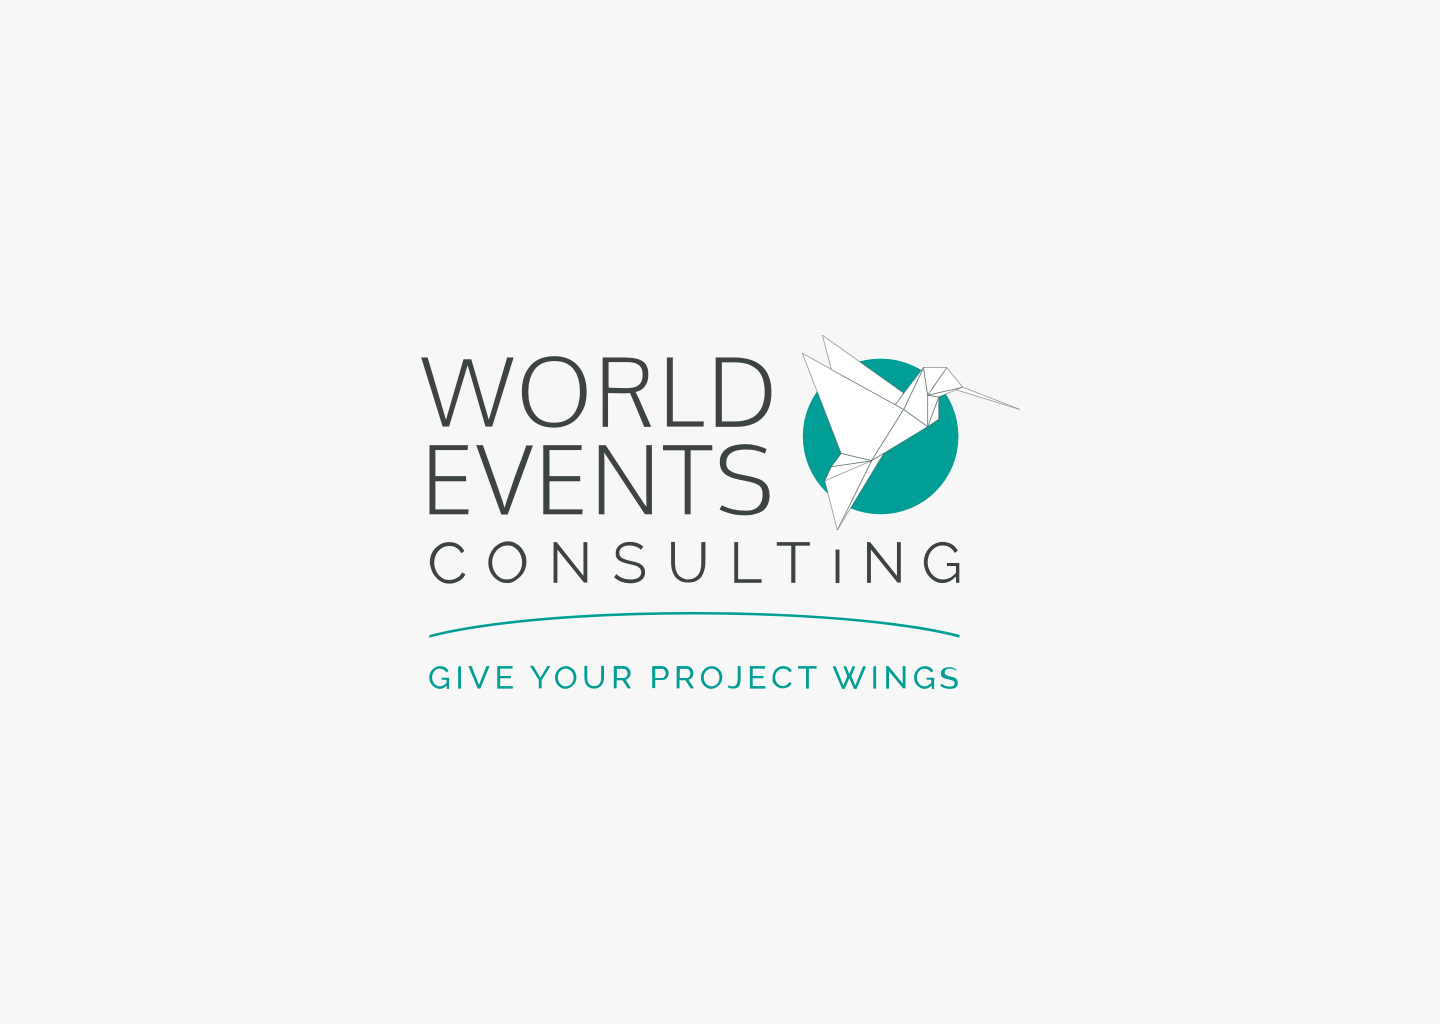 (c) World-events-consulting.ch